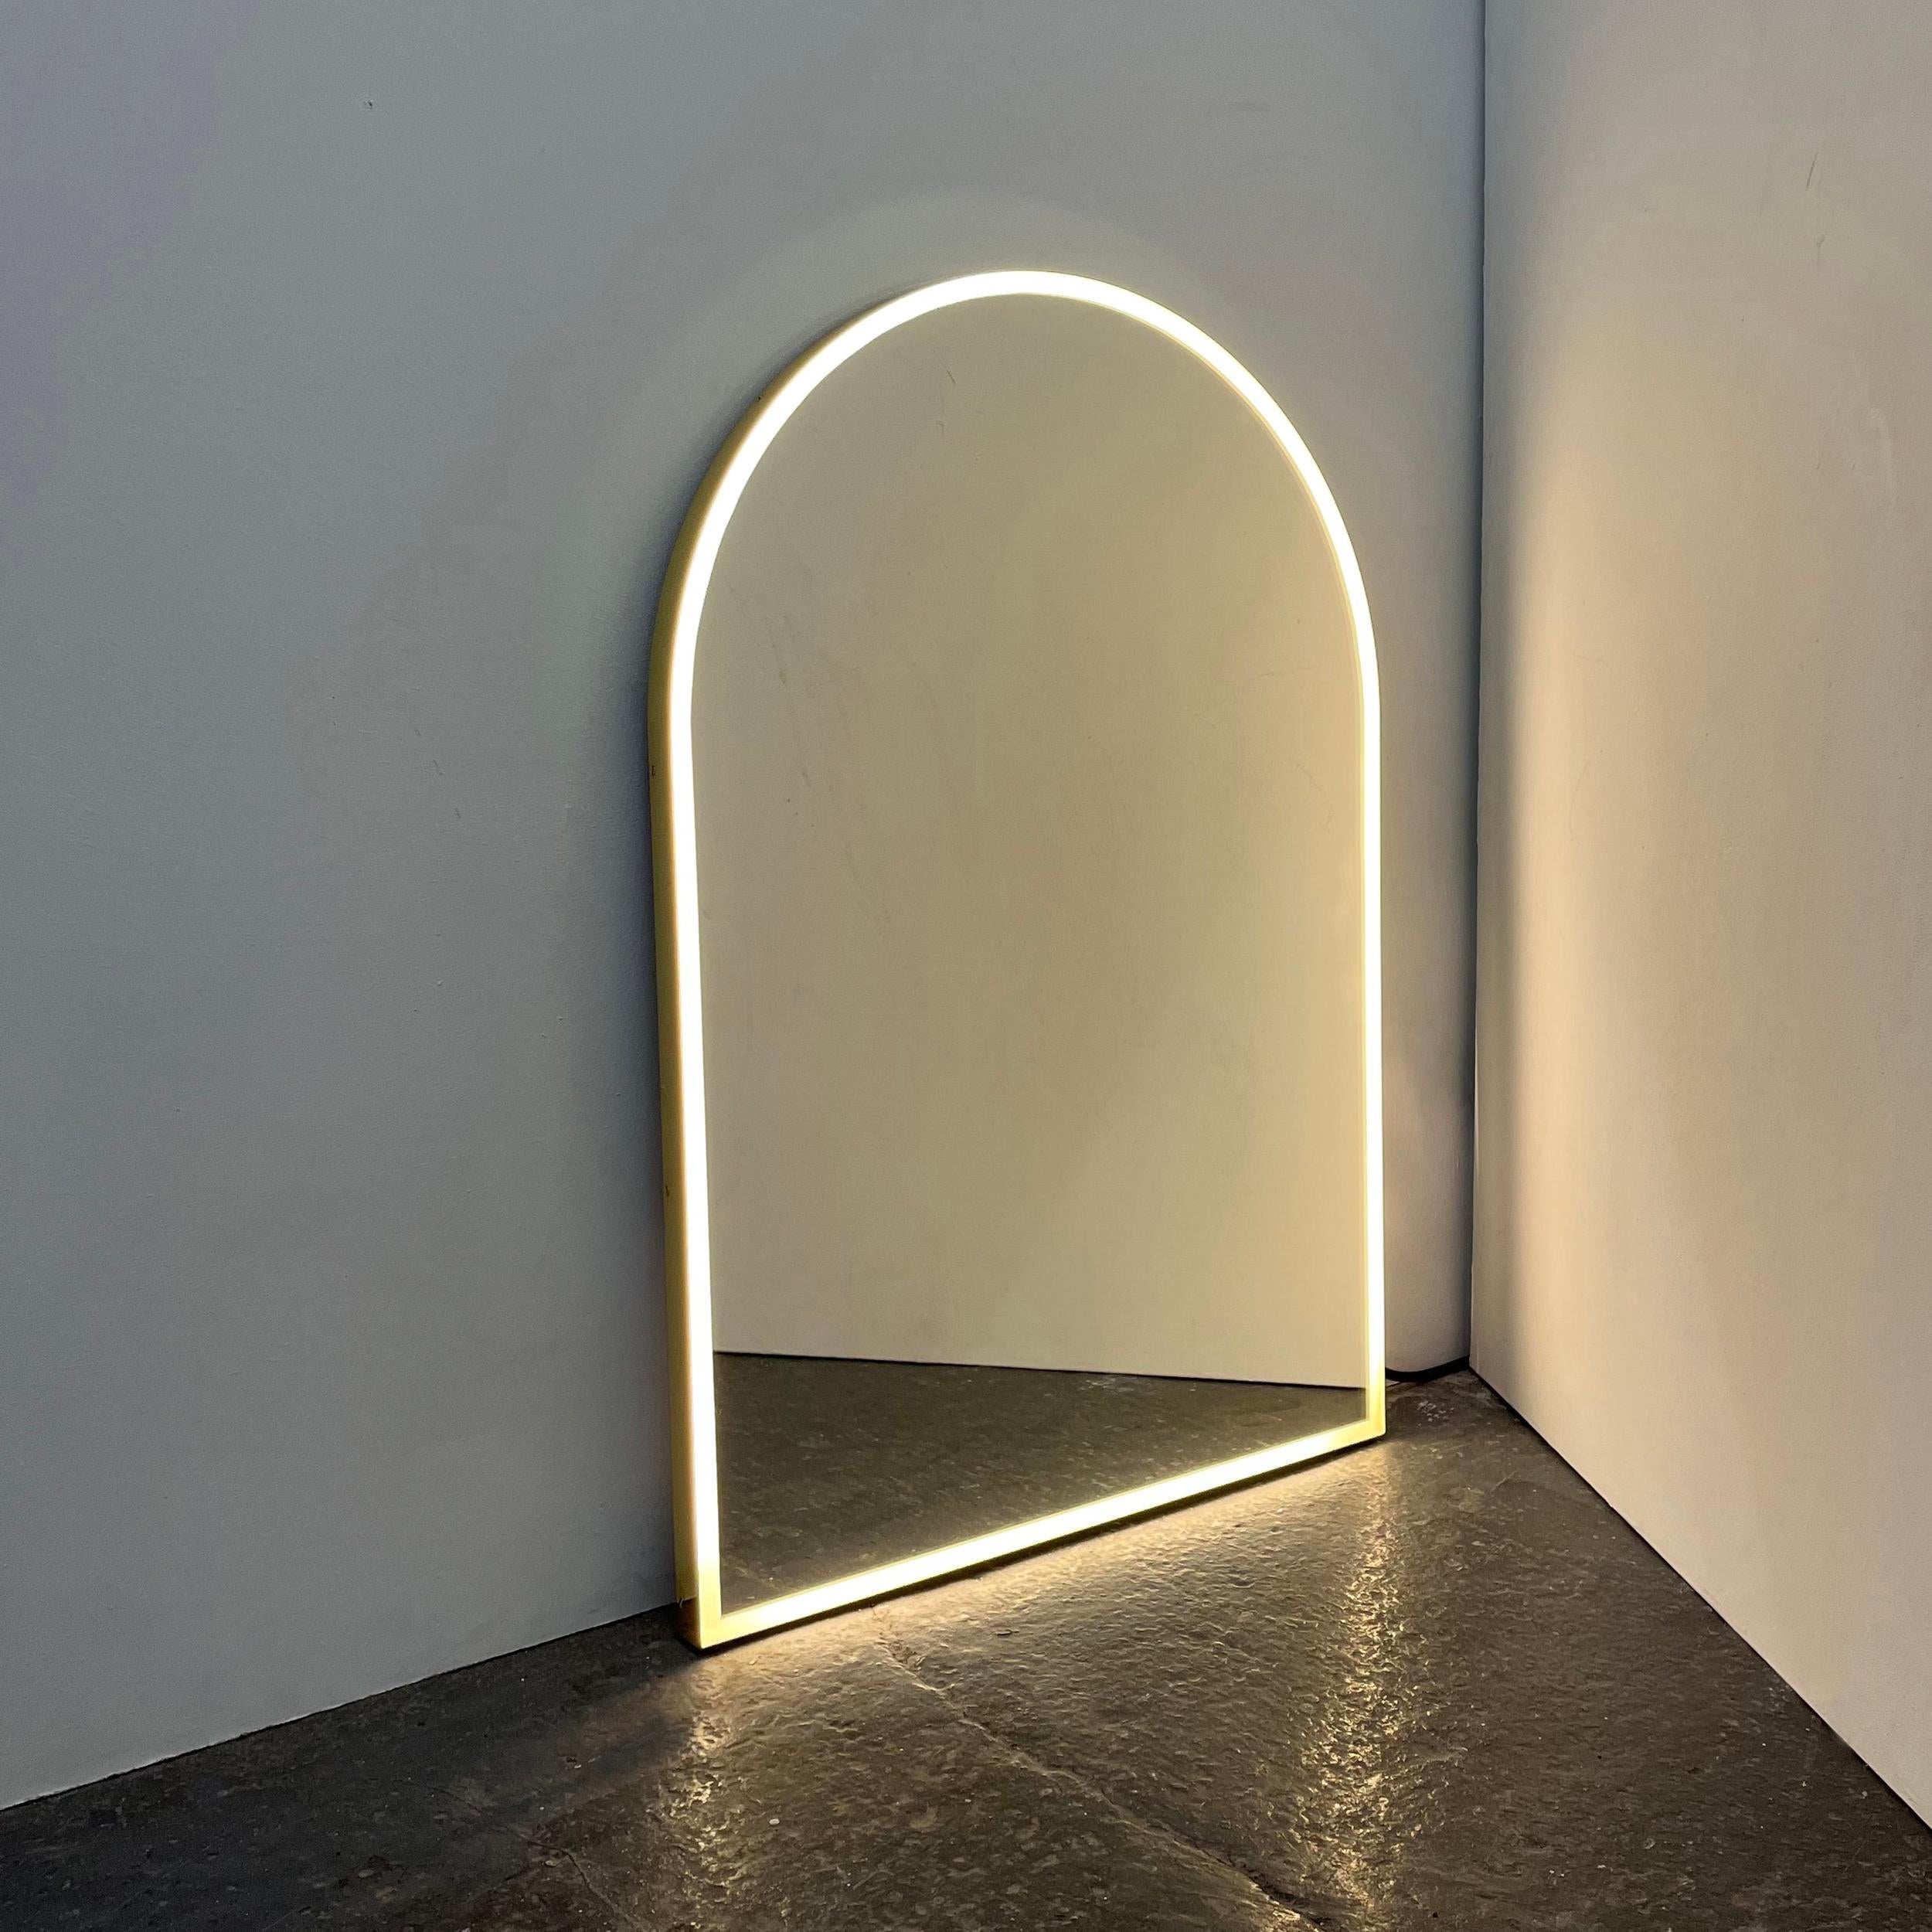 Contemporary front illuminated large arched Arcus™ mirror with a brass frame. Designed and handcrafted in London, UK.

Our mirrors are designed with an integrated French cleat (split batten) system that ensures the mirror is securely mounted flush